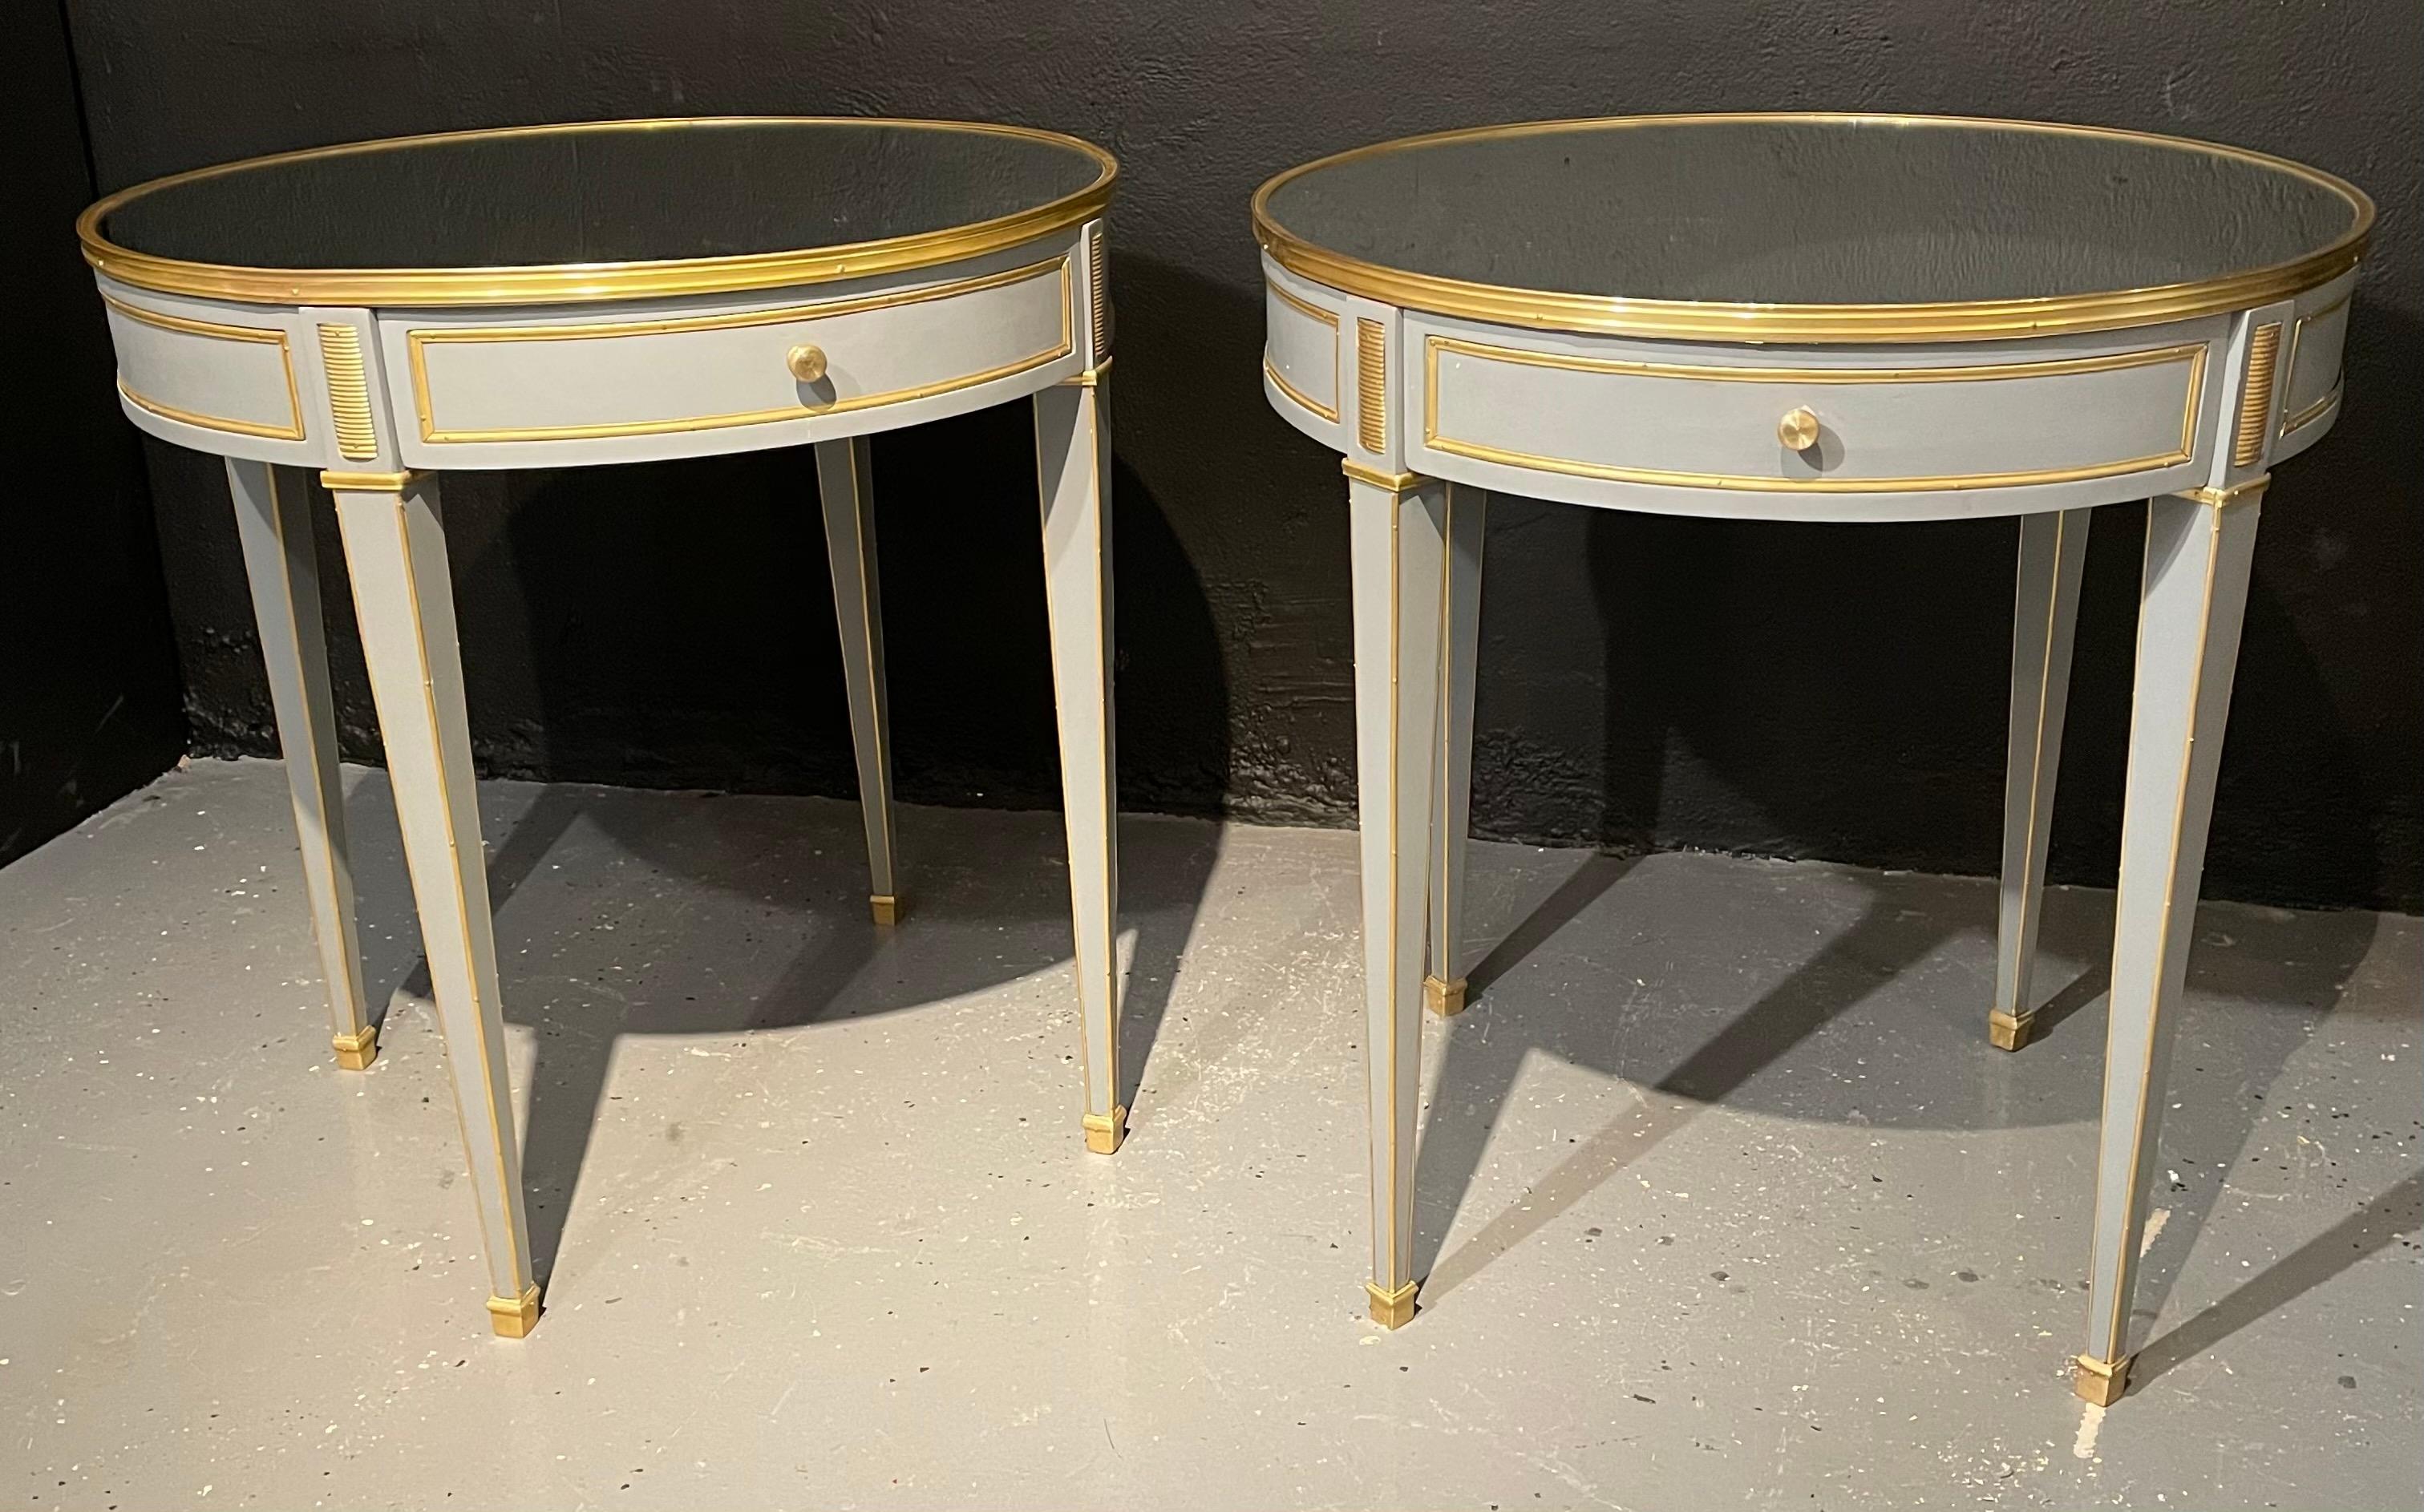 Pair of Jansen style painted end or lamp tables. Bouilliote Form. These simply stunning sleek and stylish end tables have bronze galleried mirrored tops supported by a Louis XVI style case housing one drawer. The apron having bronze framing all